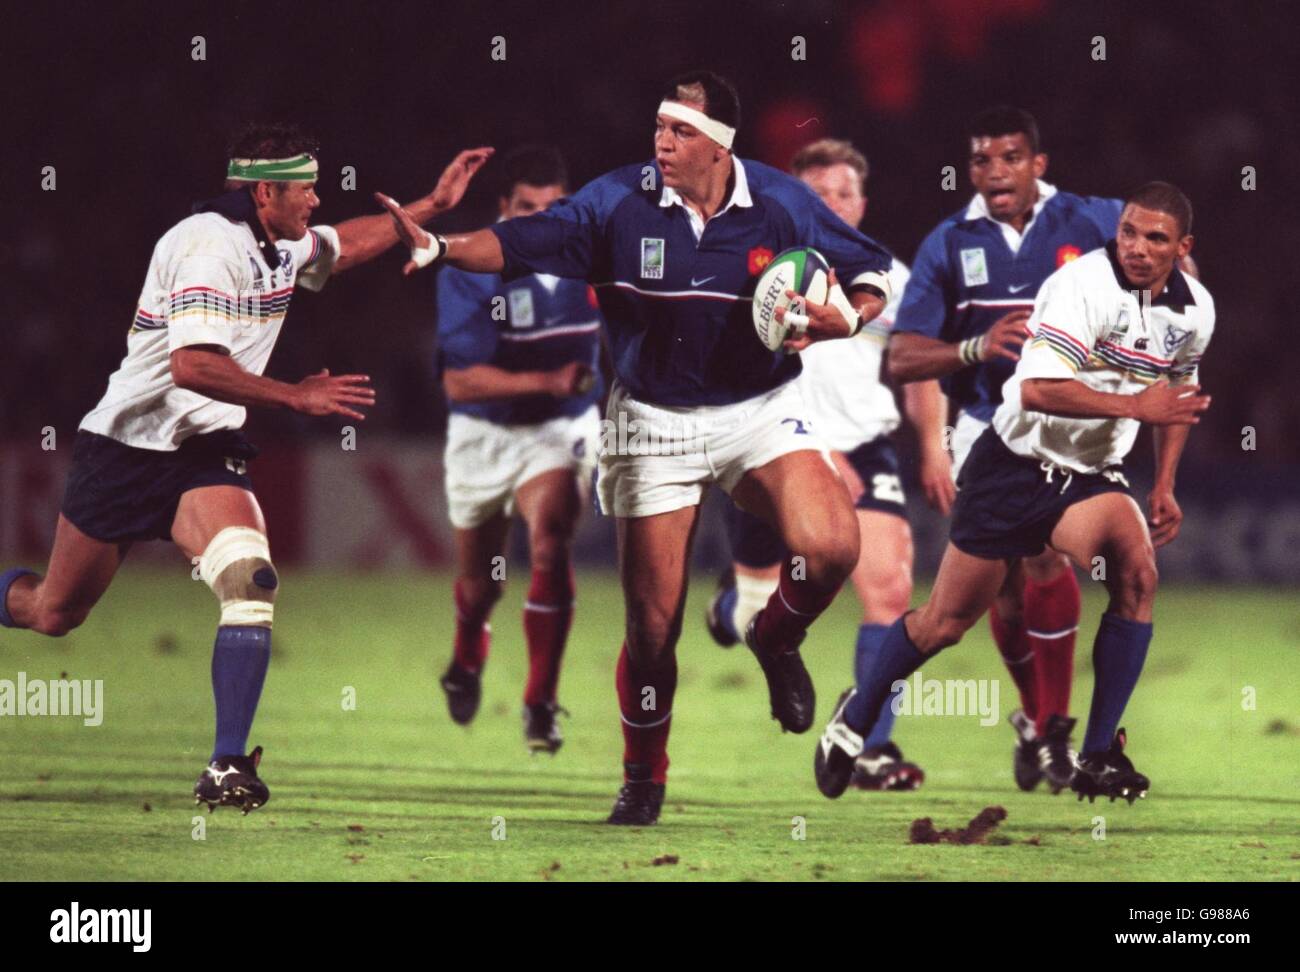 Rugby Union - Rugby World Cup 99 - Pool C - France v Nambia. France's Abdelatif Benazzi fends off a challenge from Nambias Schalk van der Merwe Stock Photo